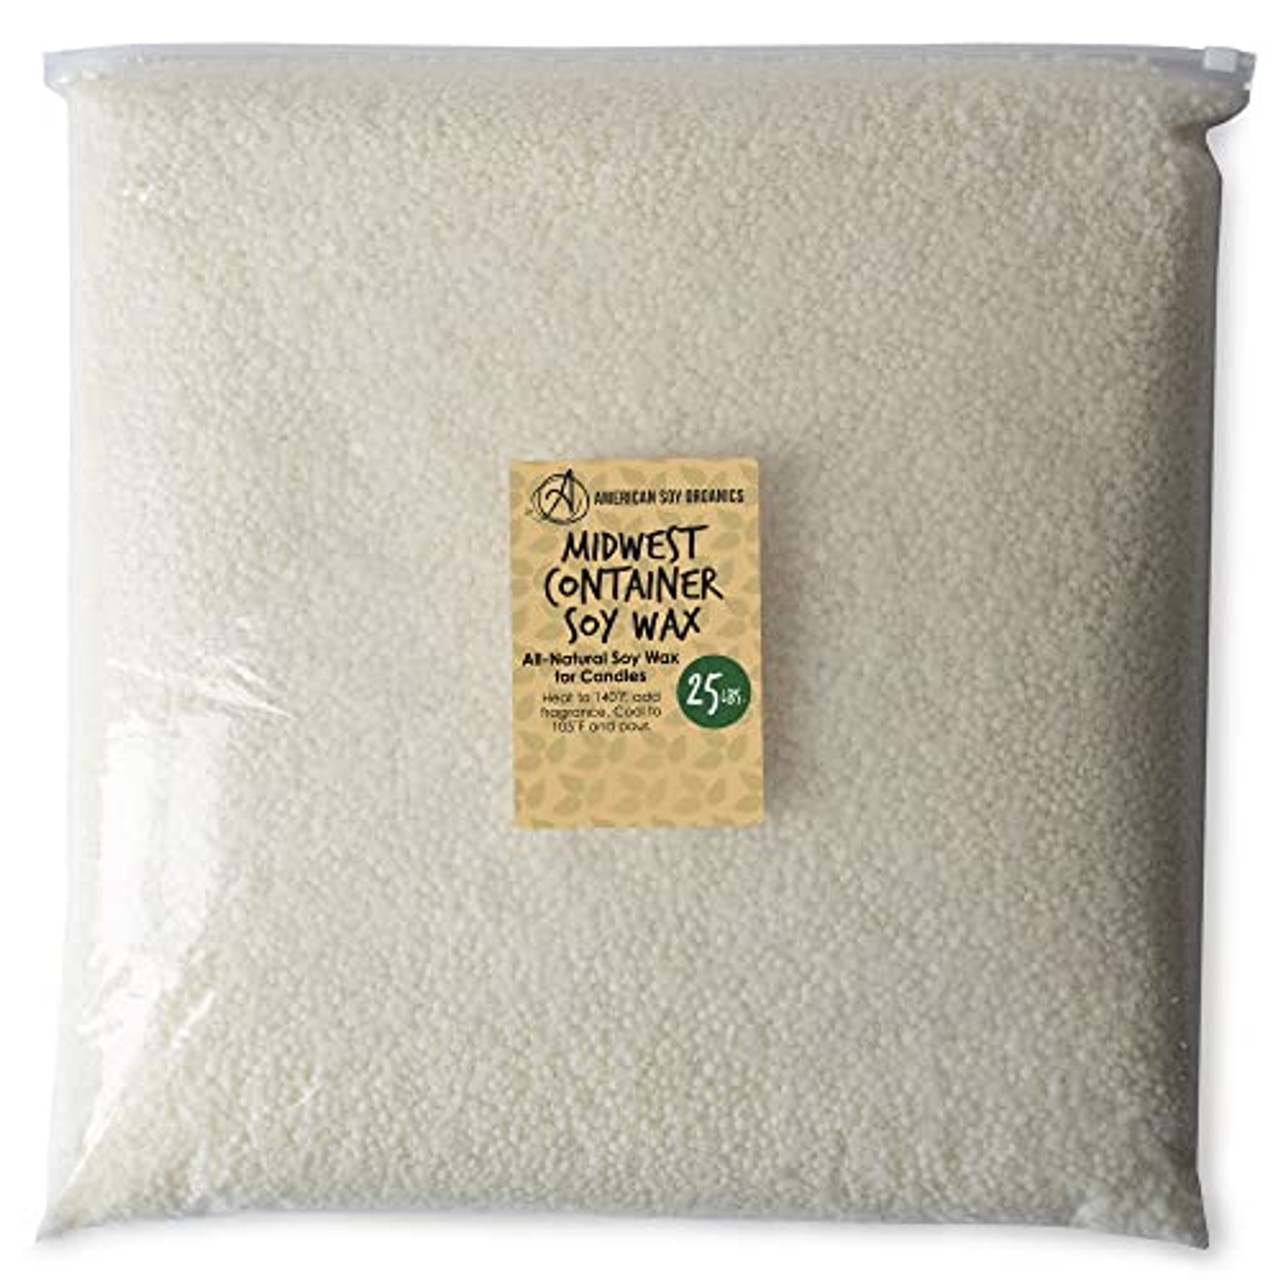 American Soy Organics - 100% Midwest Soy Container Wax Beads for Candle  Making, 10 lb Bag